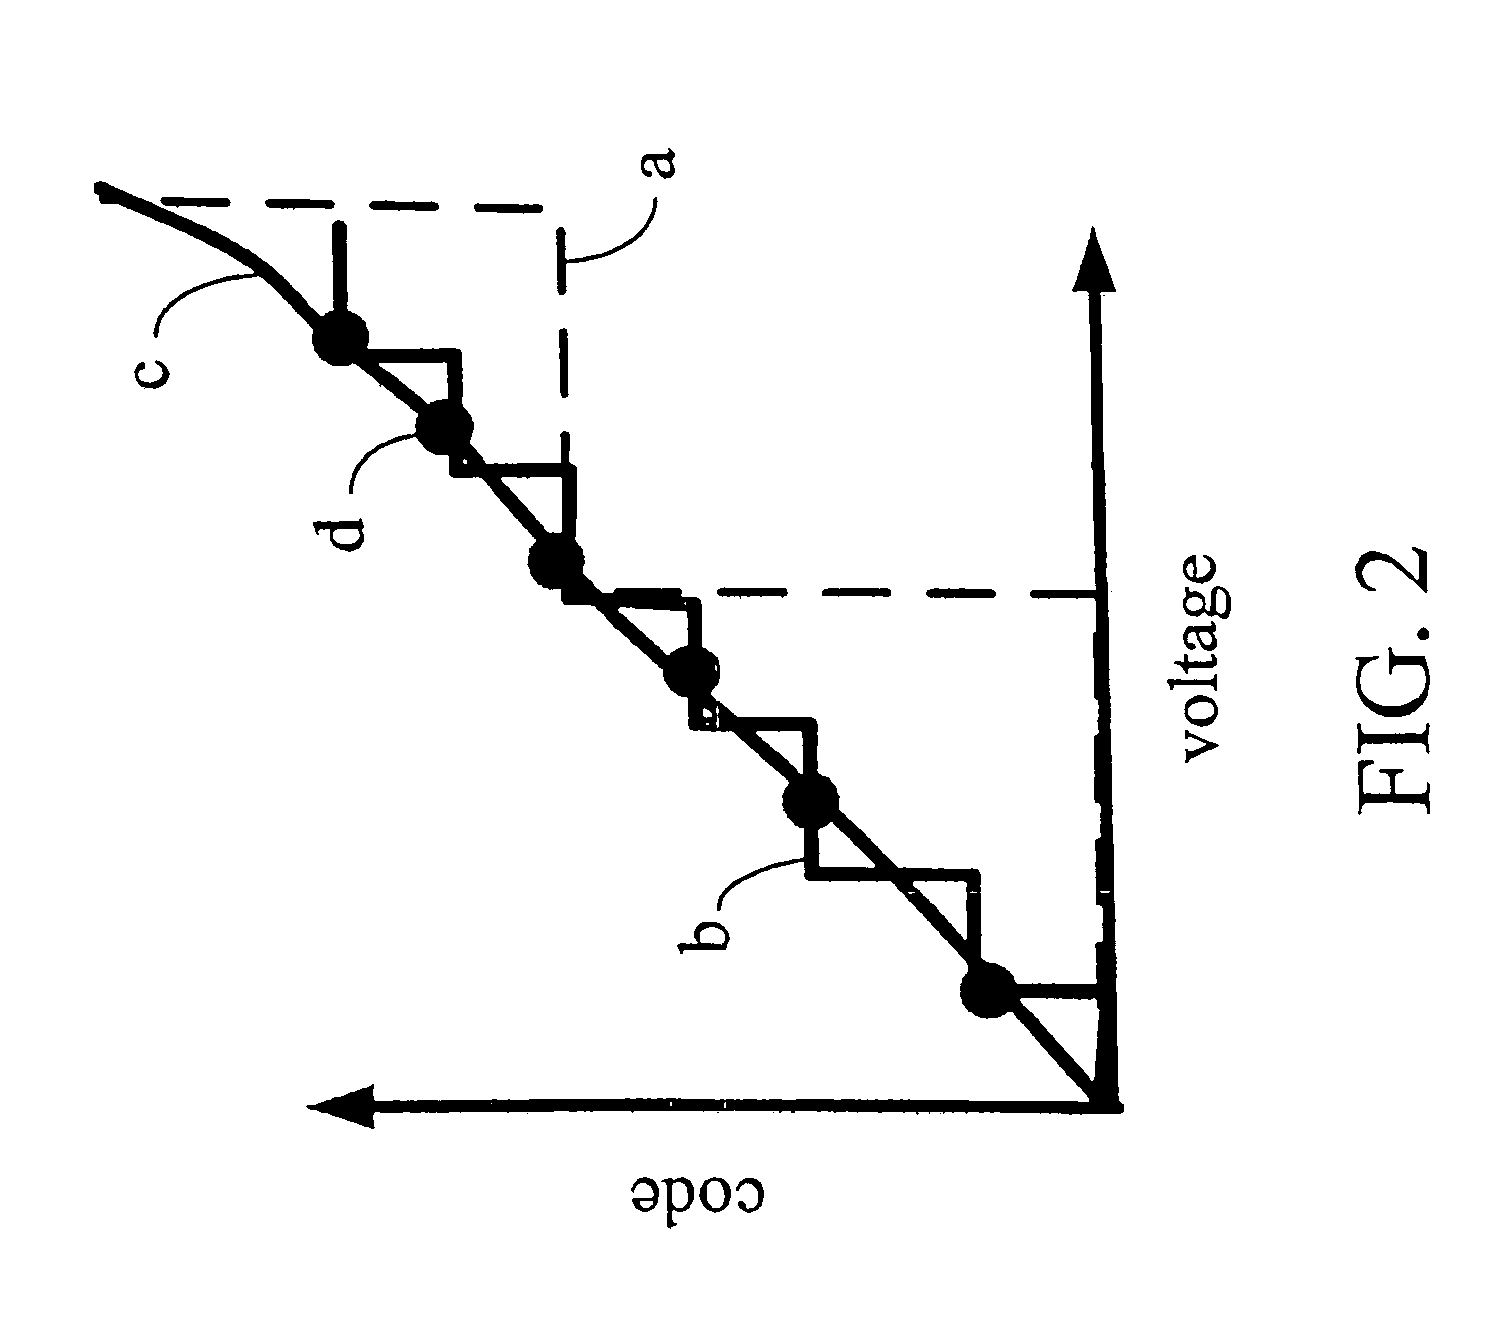 Built-in-self-test apparatus and method for analog-to-digital converter